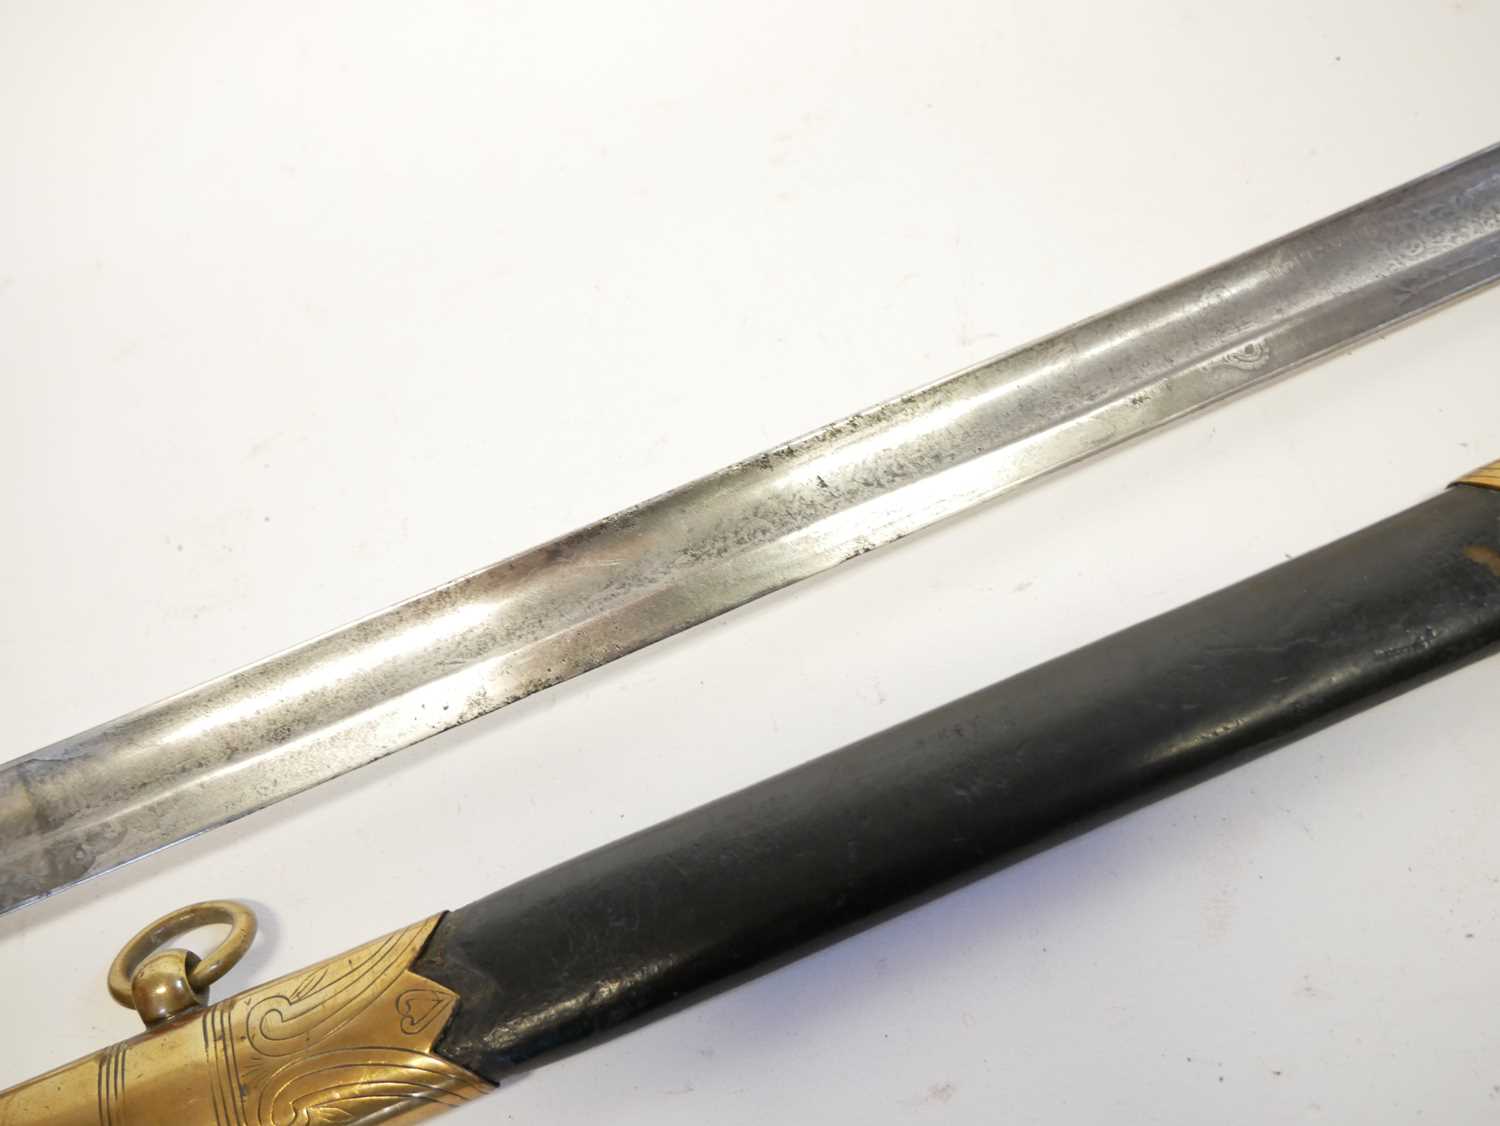 Royal Navy Petty Officer's sword, similar to an 1827 Naval sword but without the lion head pommel, - Image 7 of 16